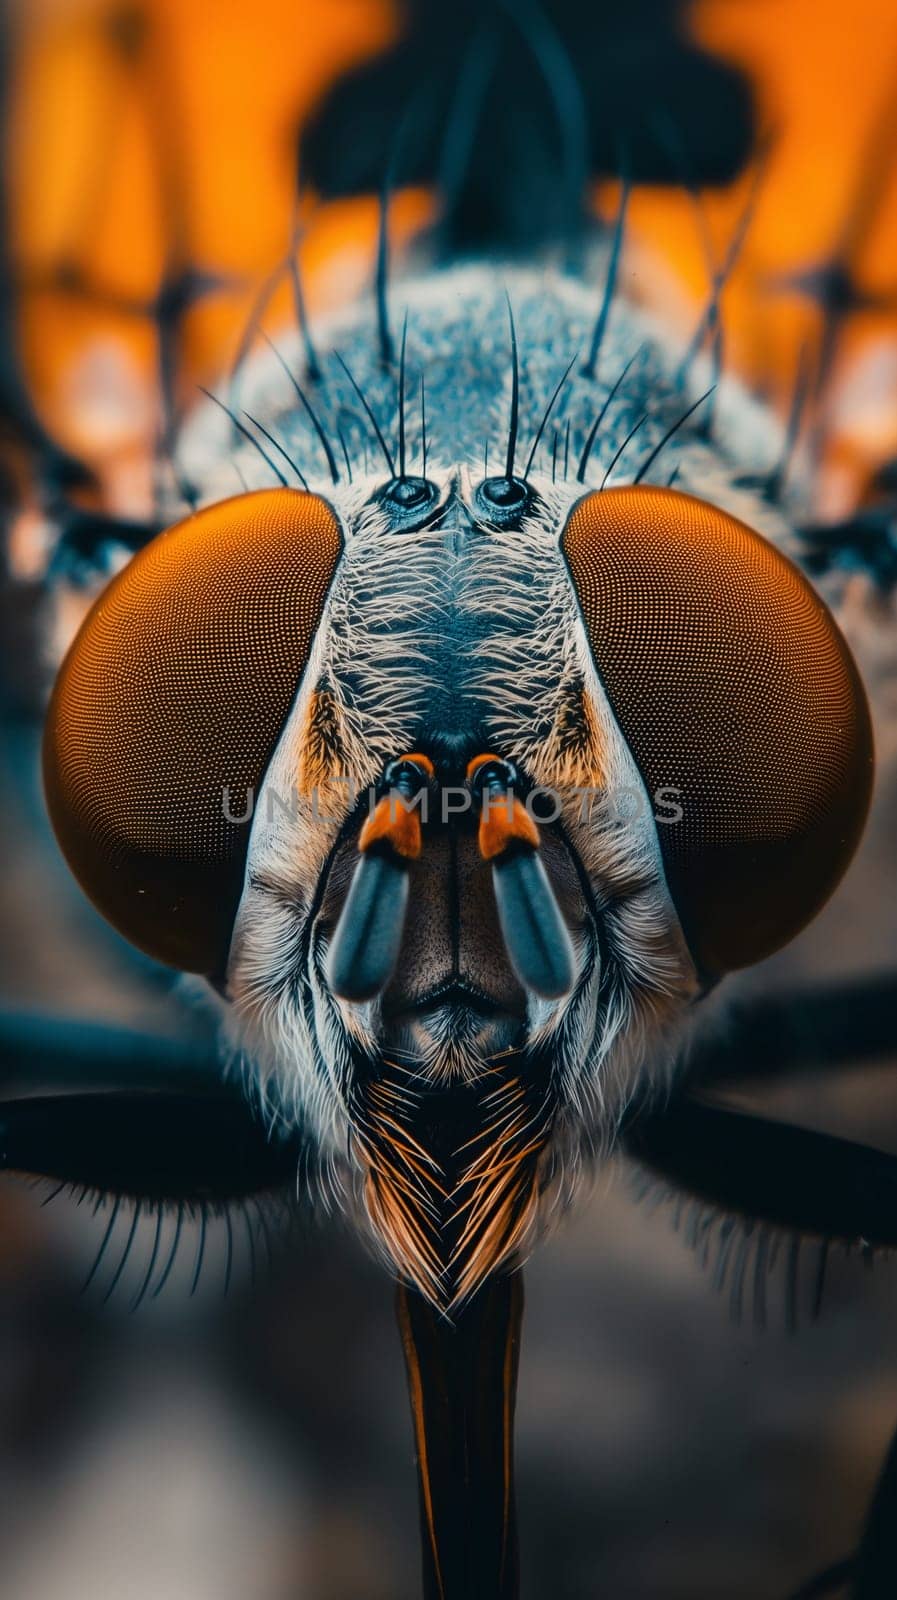 Extreme Close-Up of a Houseflys Head and Compound Eyes by chrisroll